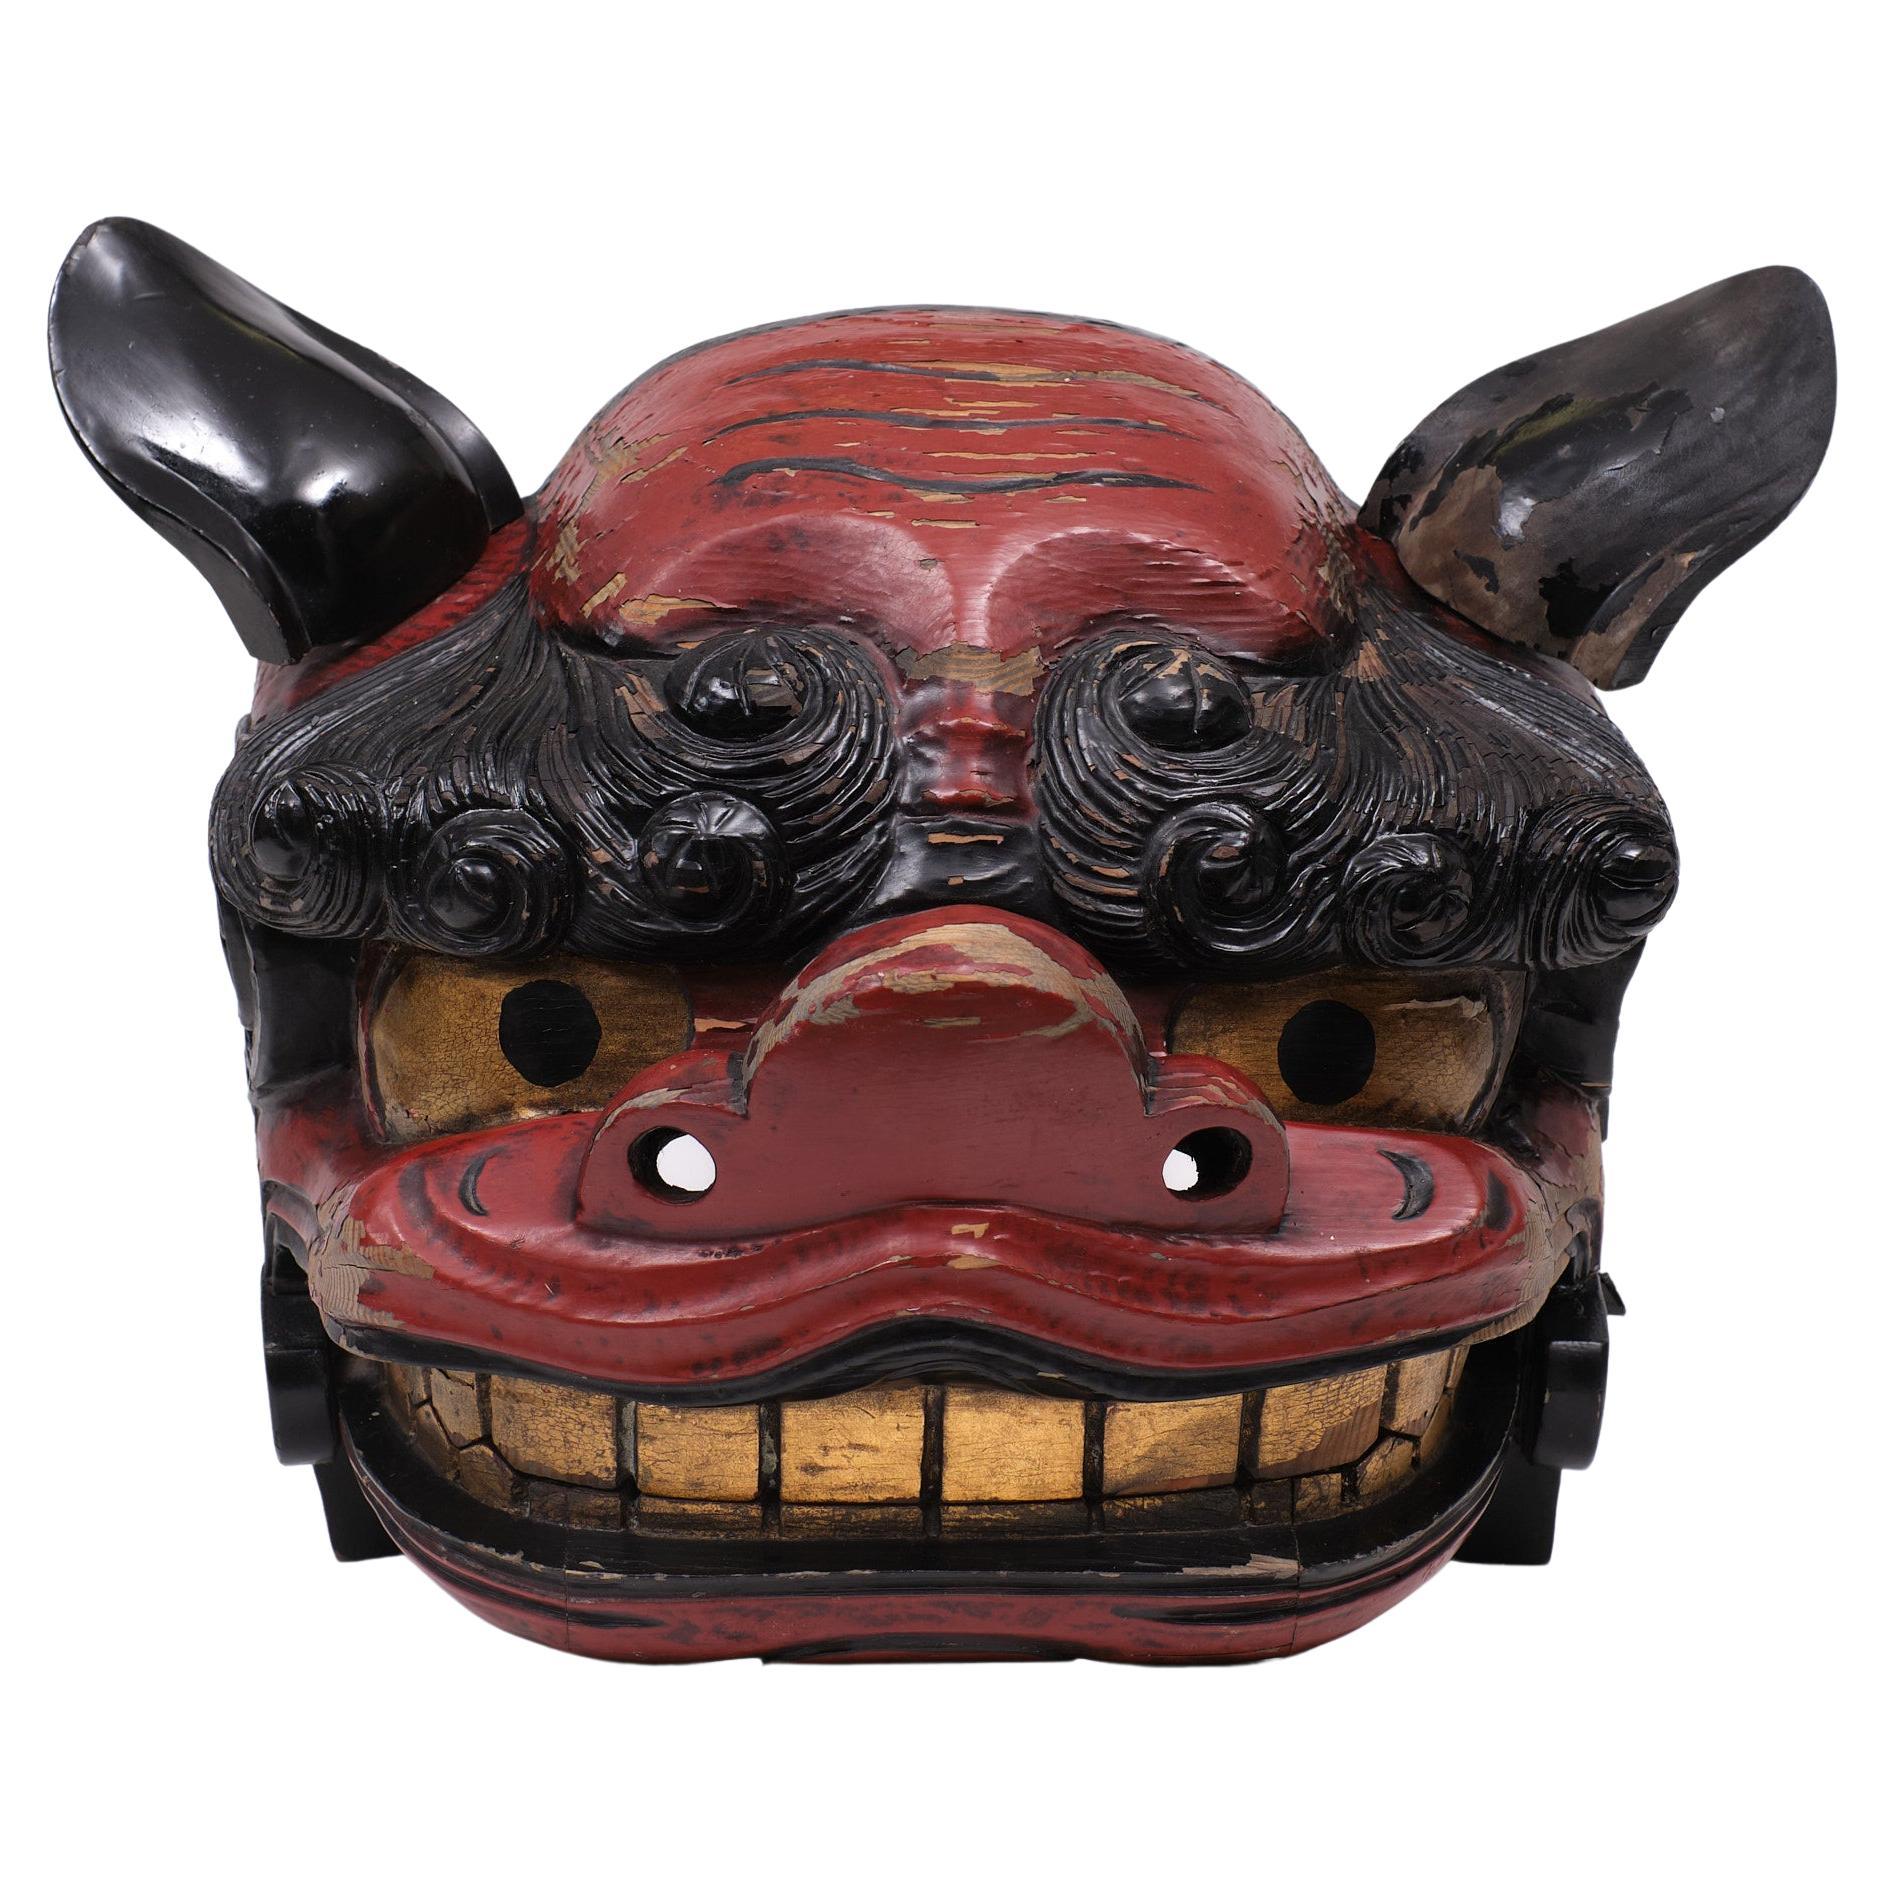 Very nice highly decorative Shishi face Mask Japan 1940s ,some paint losses .
hand carved.